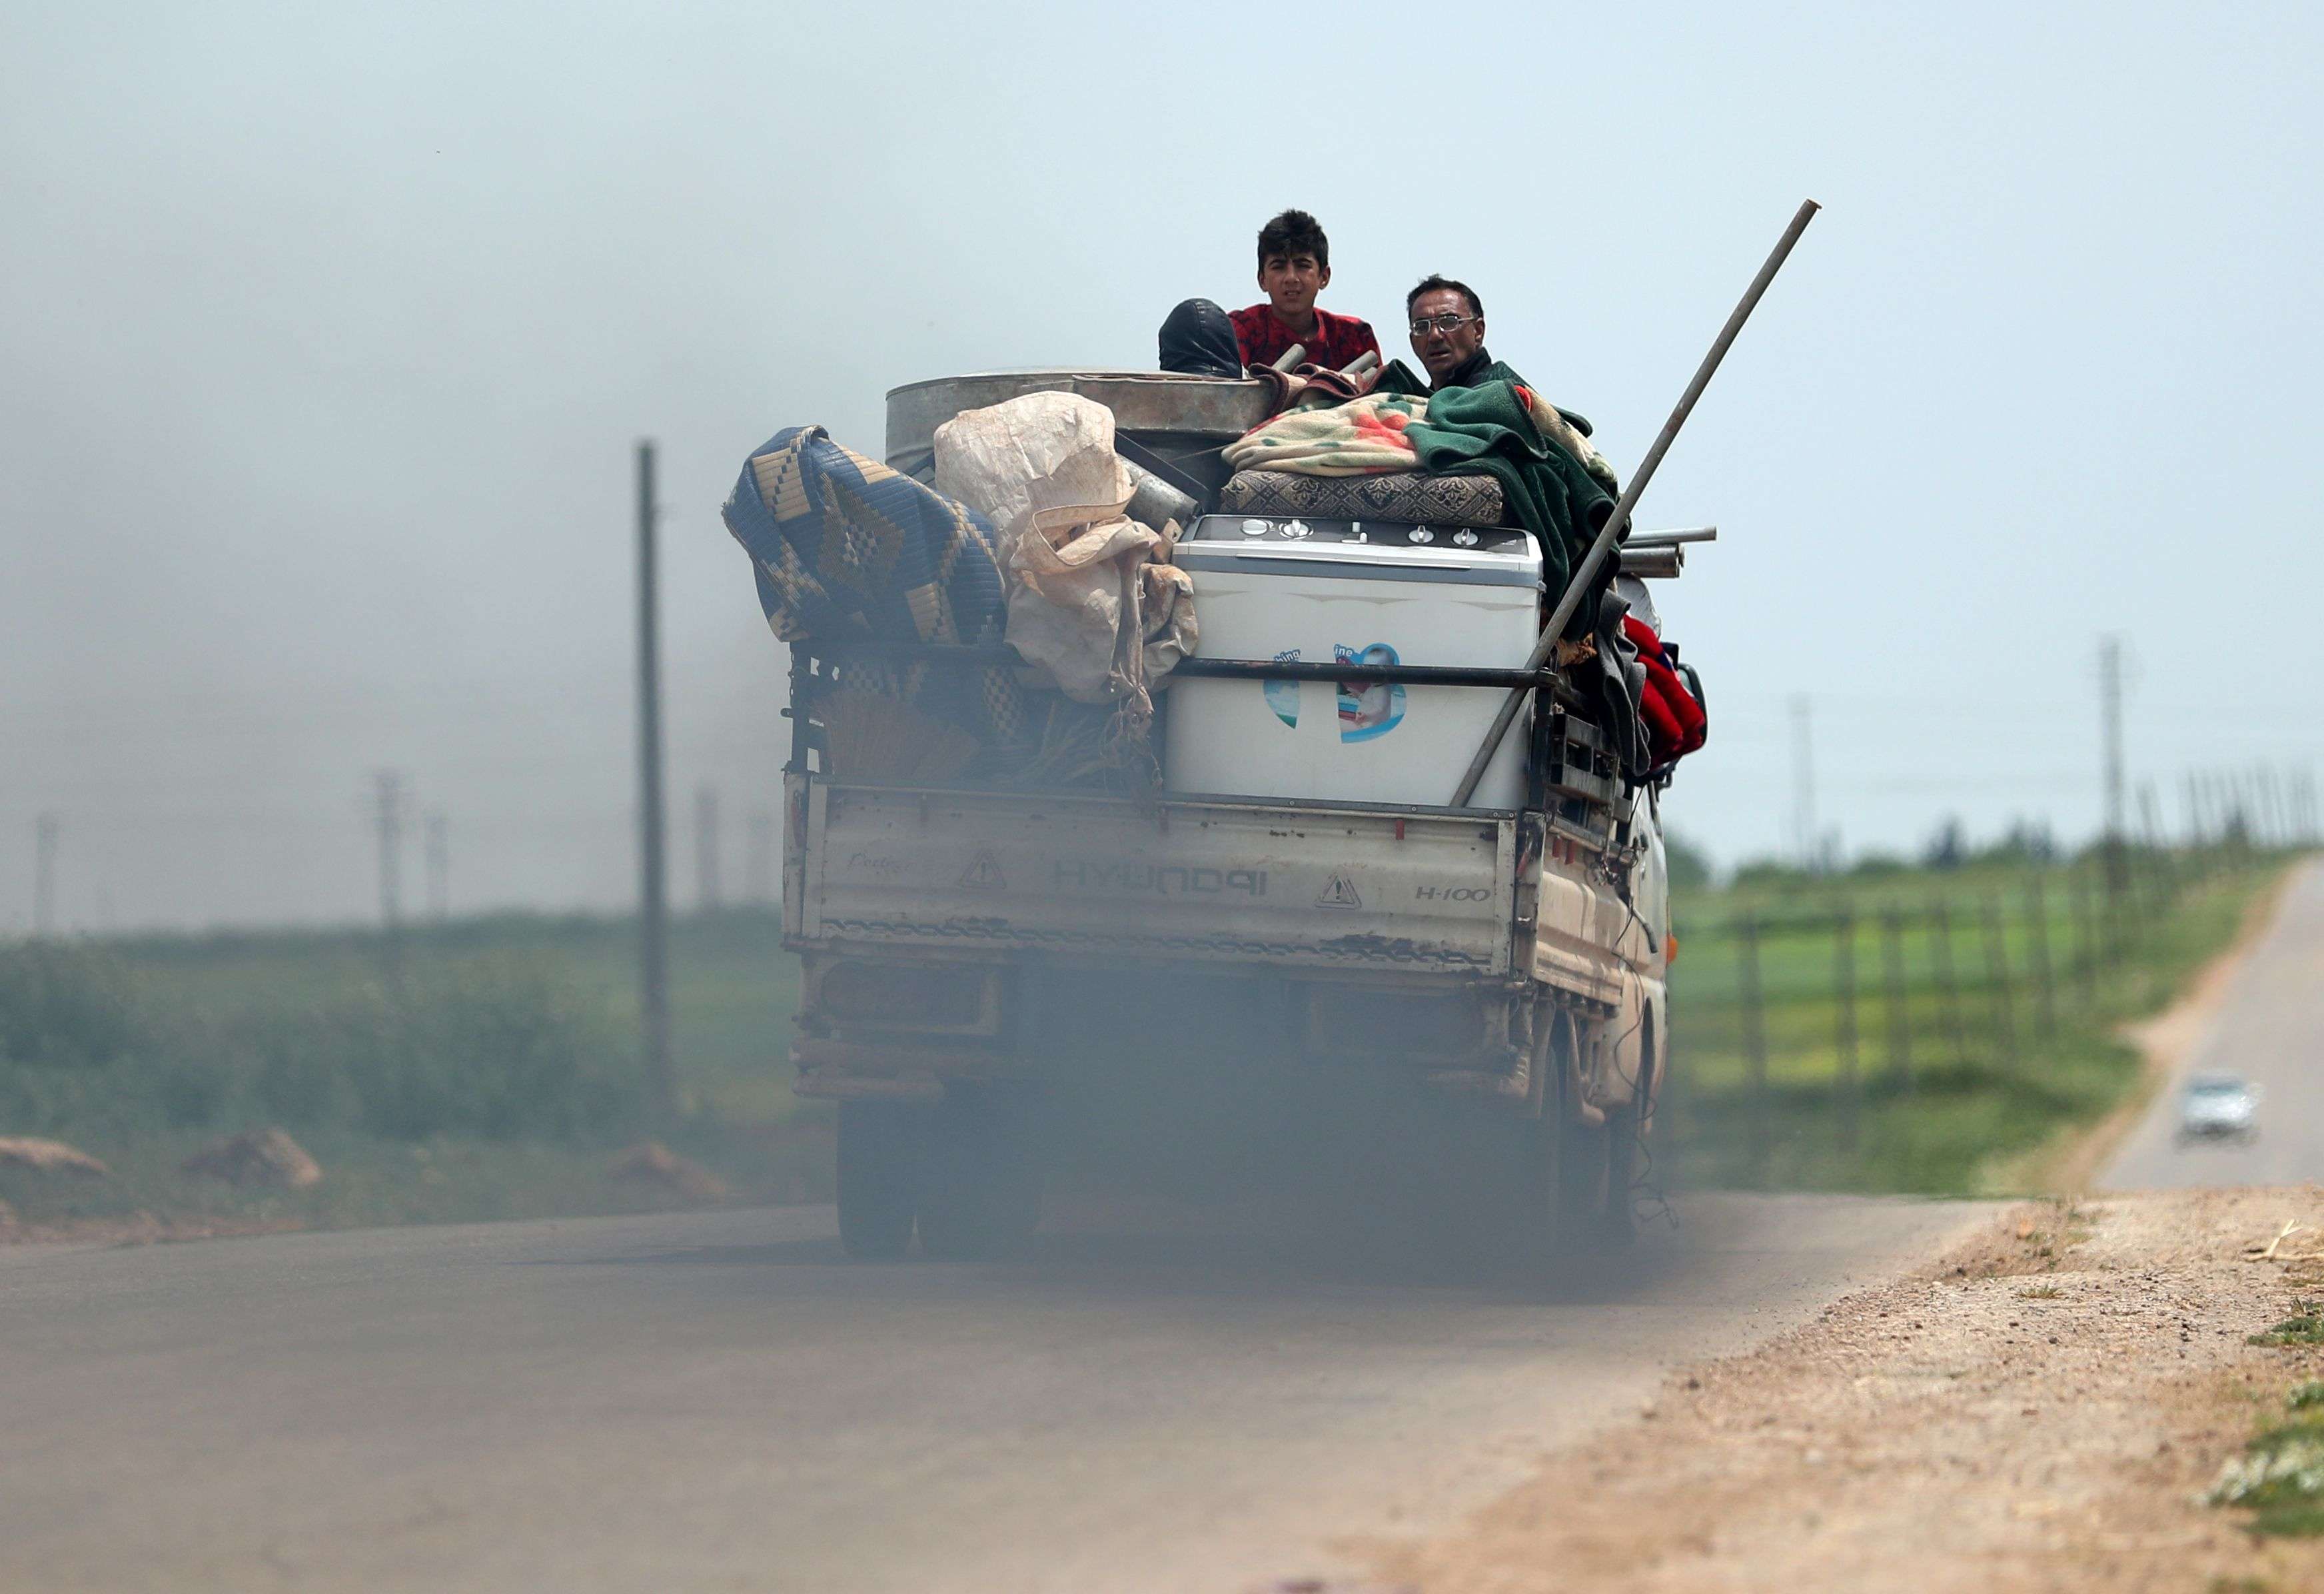 A displaced Syrian family rides in the back of a truck loaded with furniture and clothes